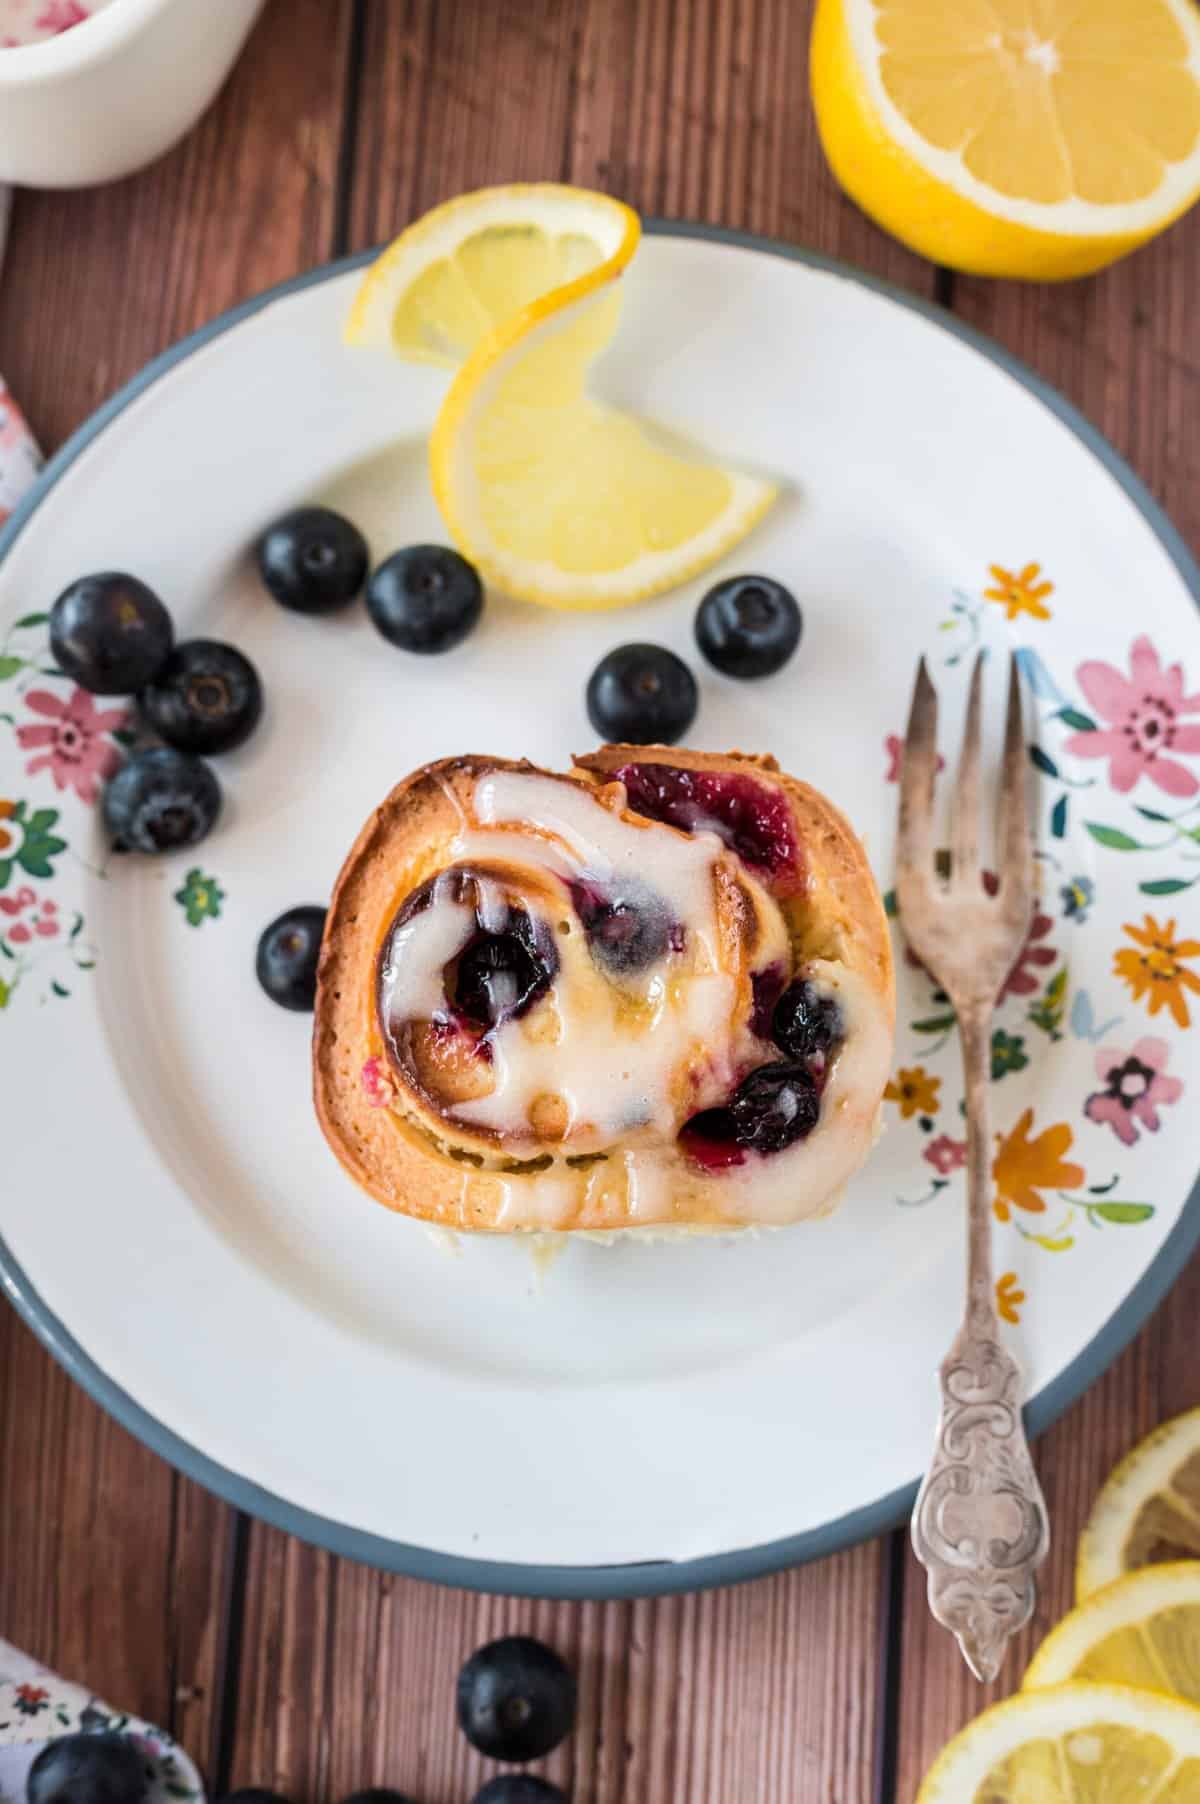 A lemon blueberry roll is on a white plate, next to a lemon slice and fresh berries.